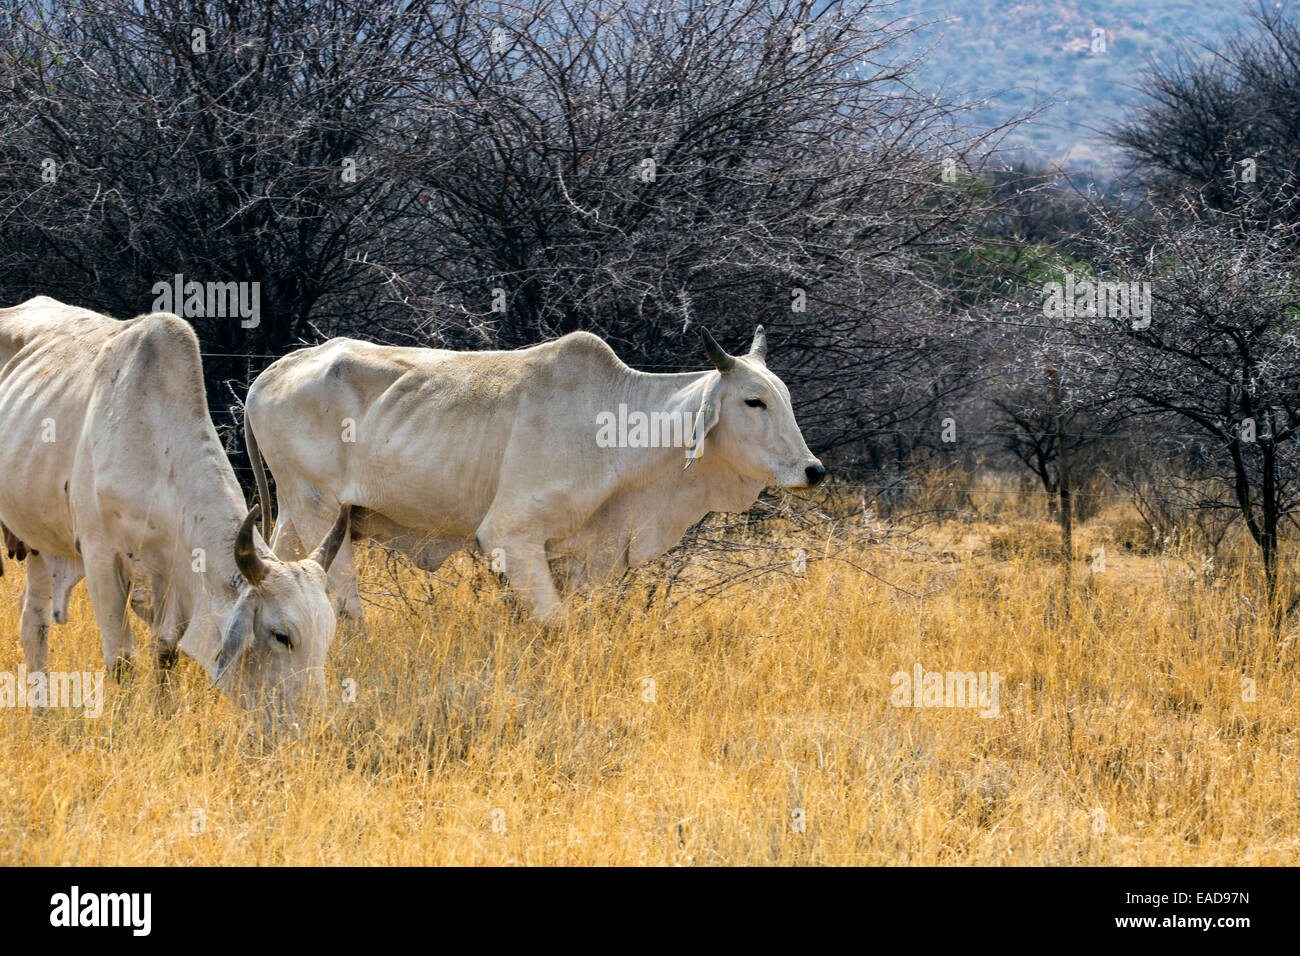 Cattle in Namibia Stock Photo